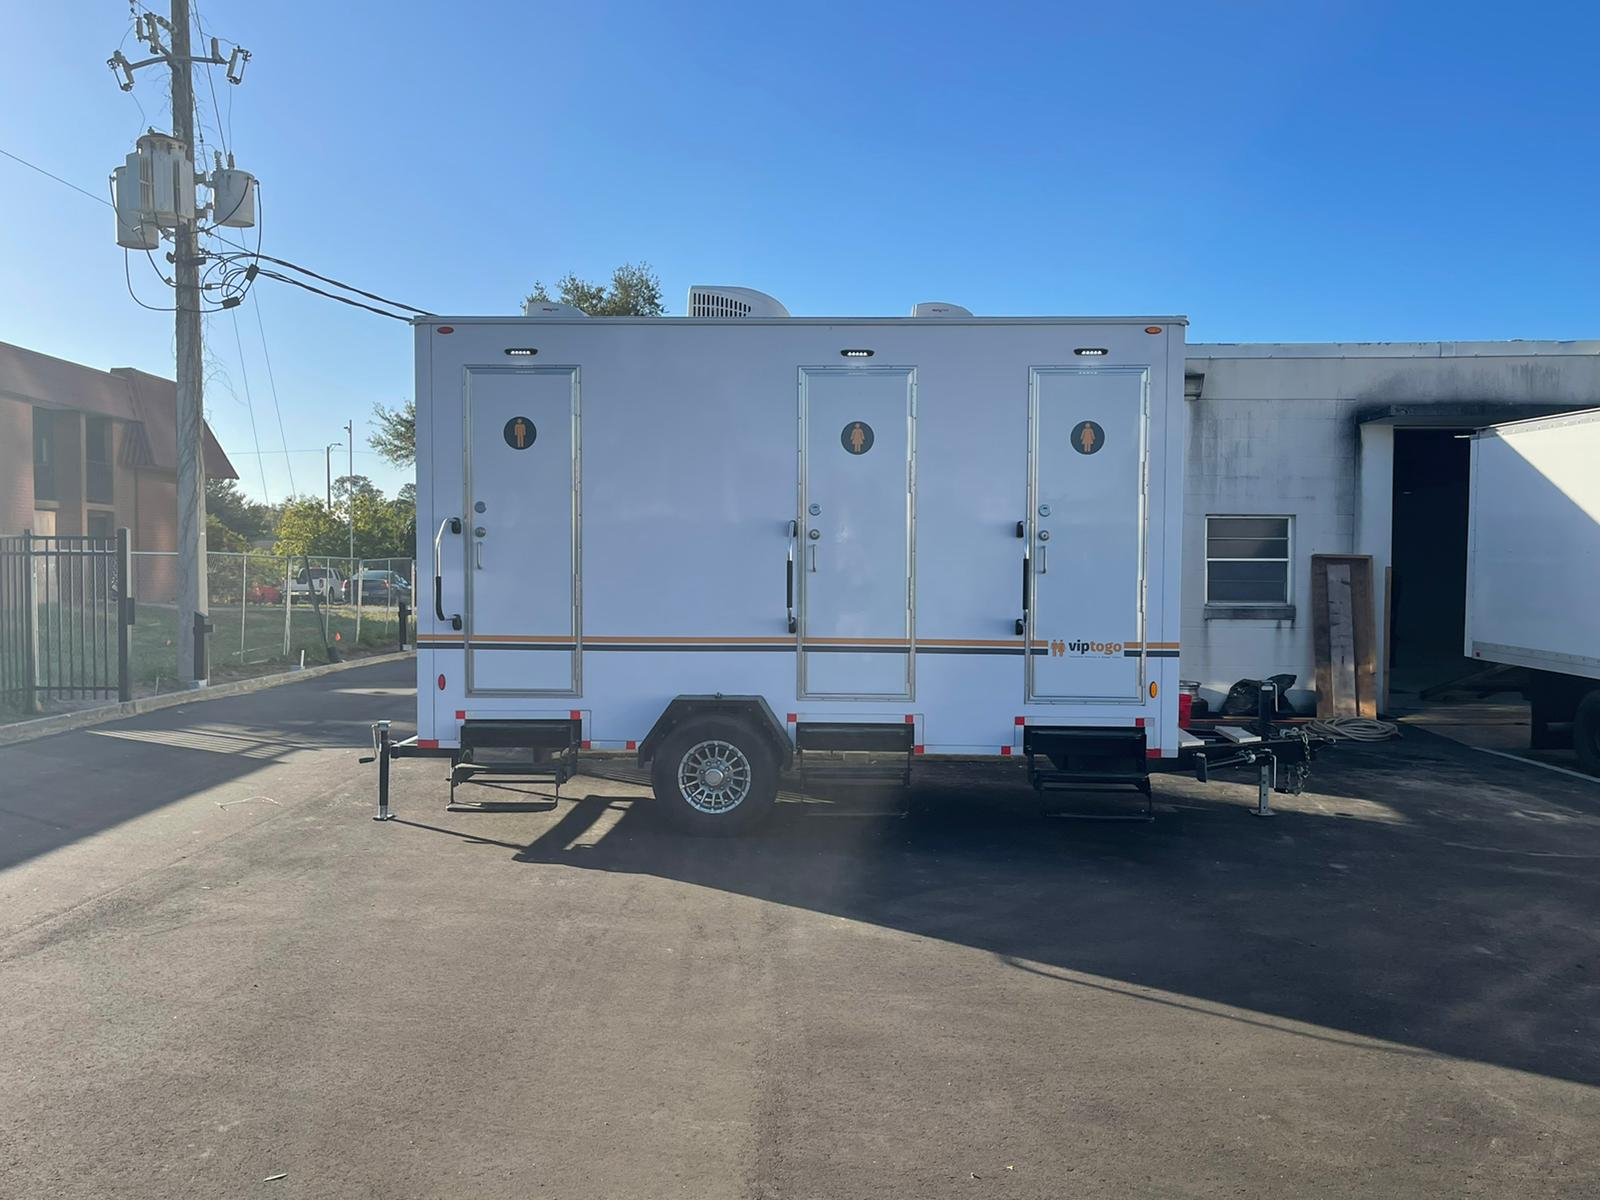 VIP To Go emergency management restroom trailers